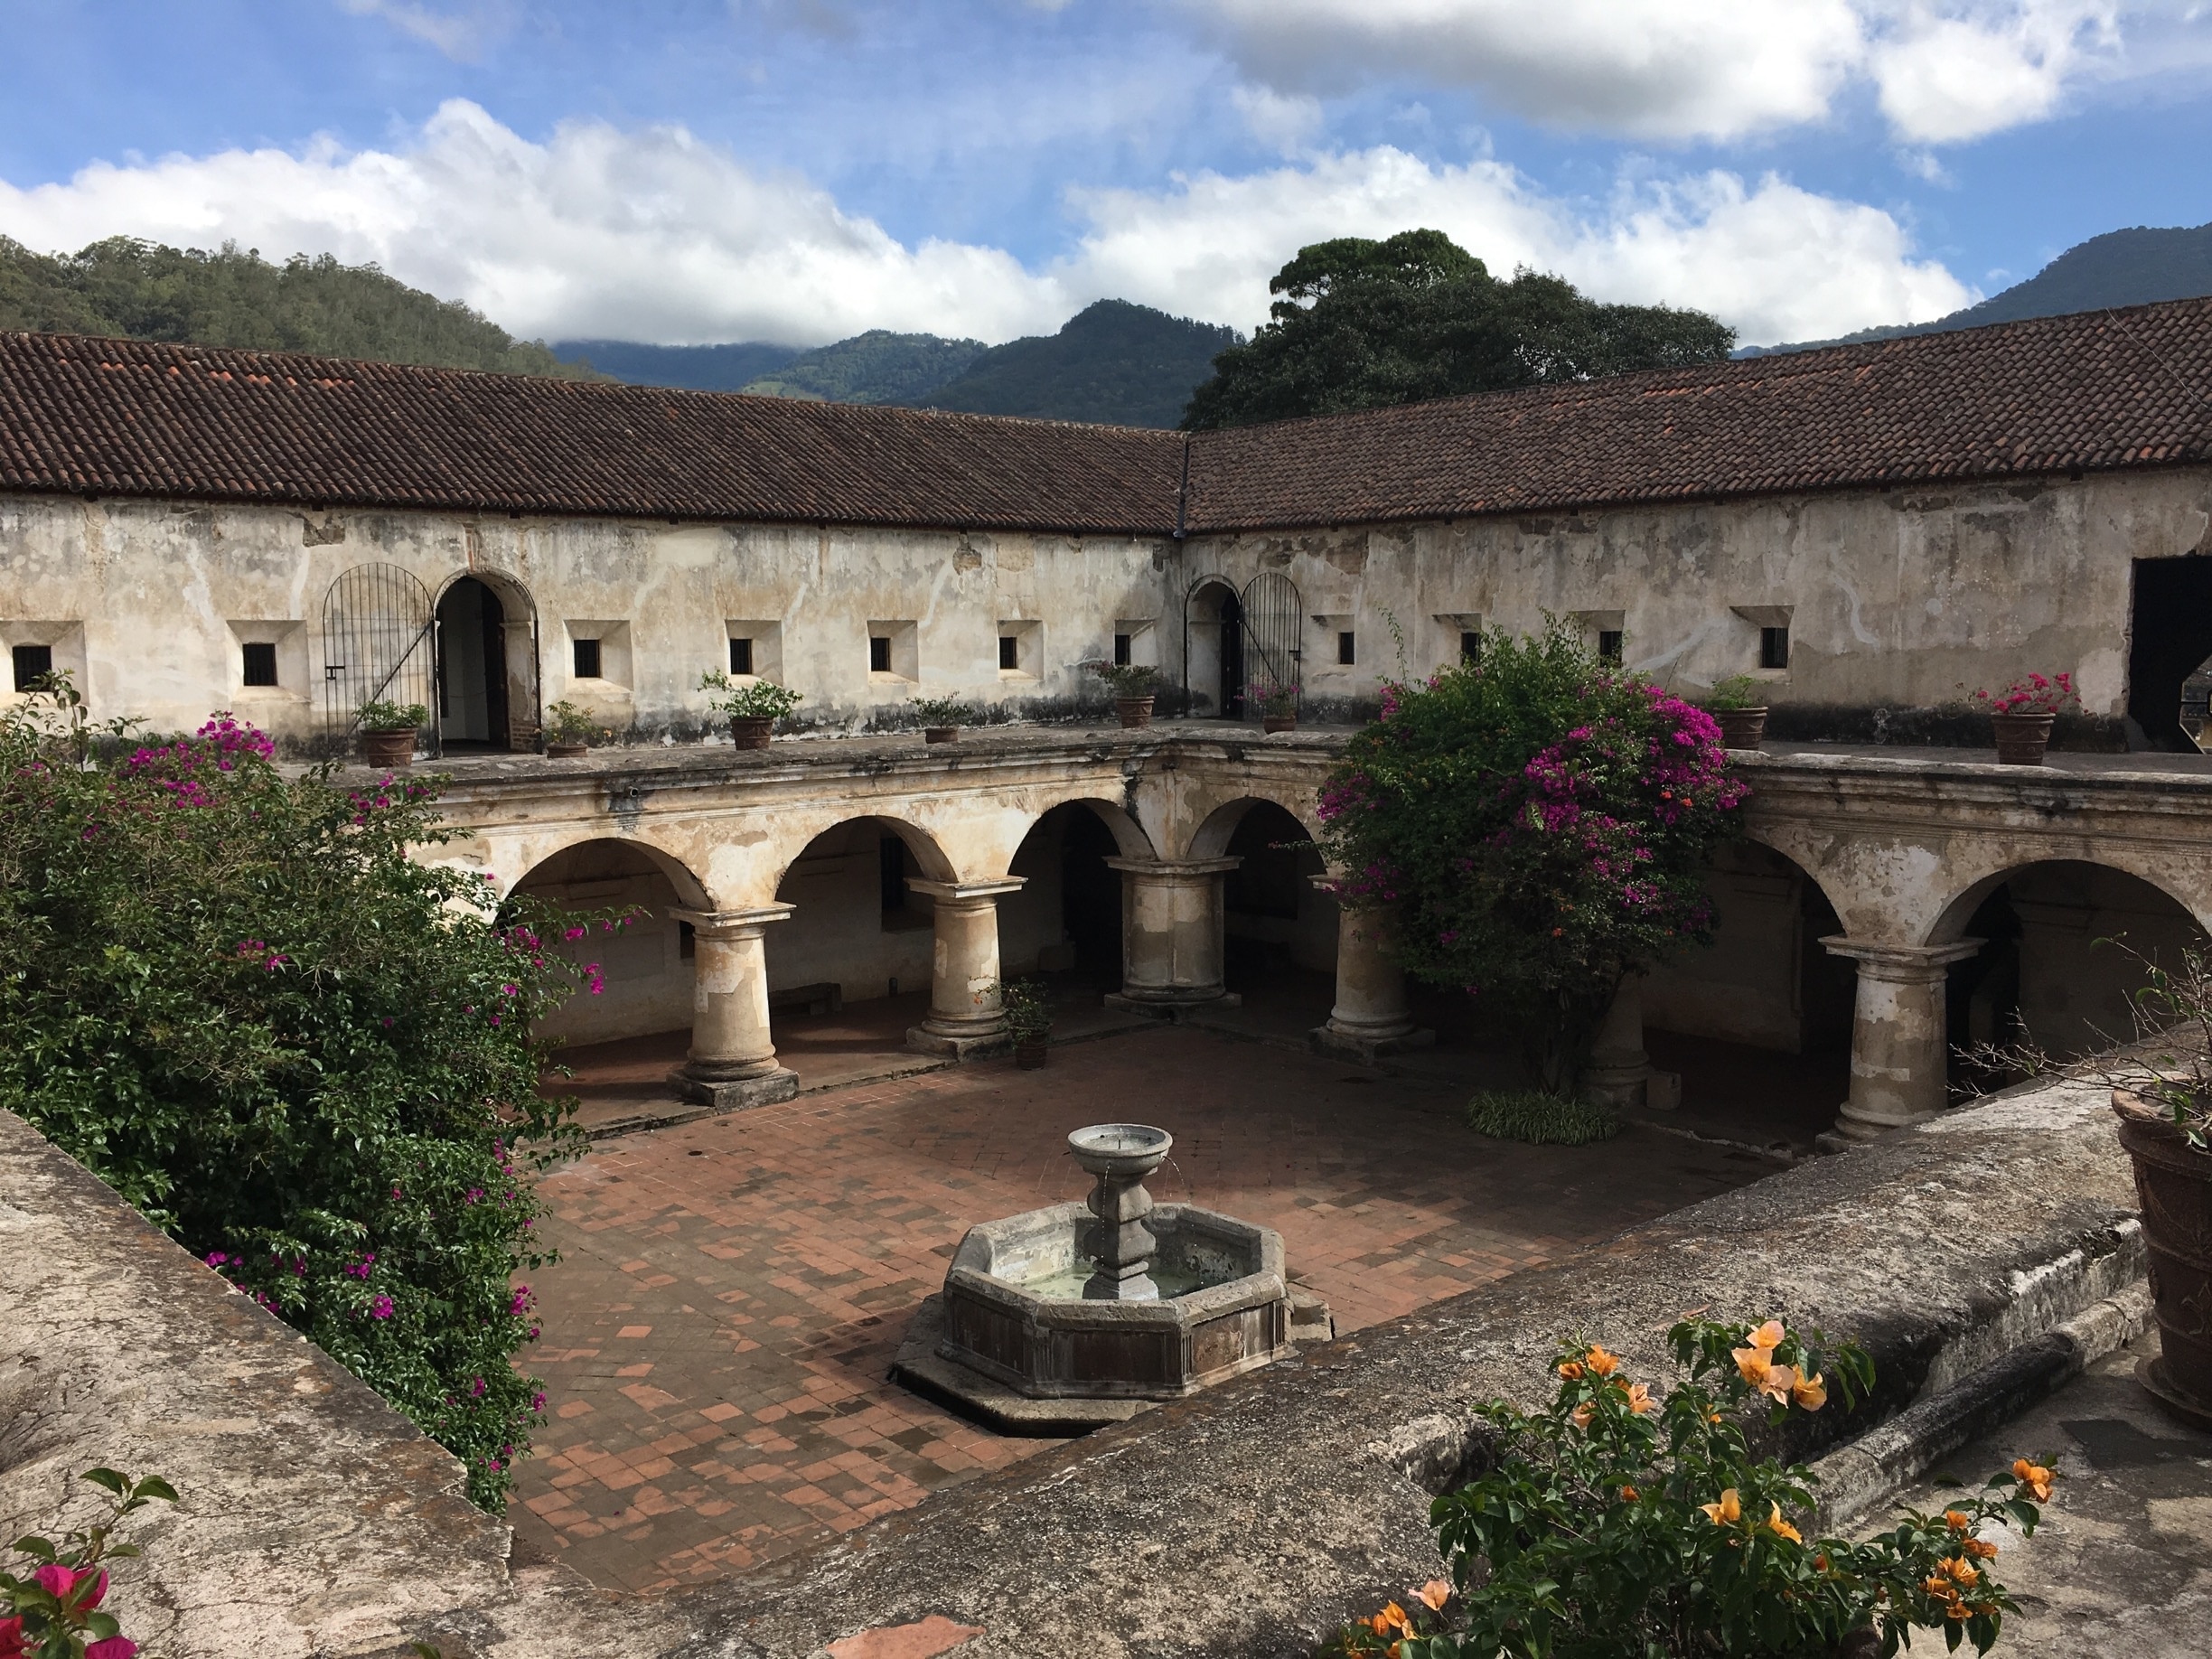 The main courtyard of the Convento de las Capuchinas. It was consecrated in 1736, but abandoned after earthquakes in 1751 and 1773. Wandering the grounds for 40Q is a great way to spend an hour or two.